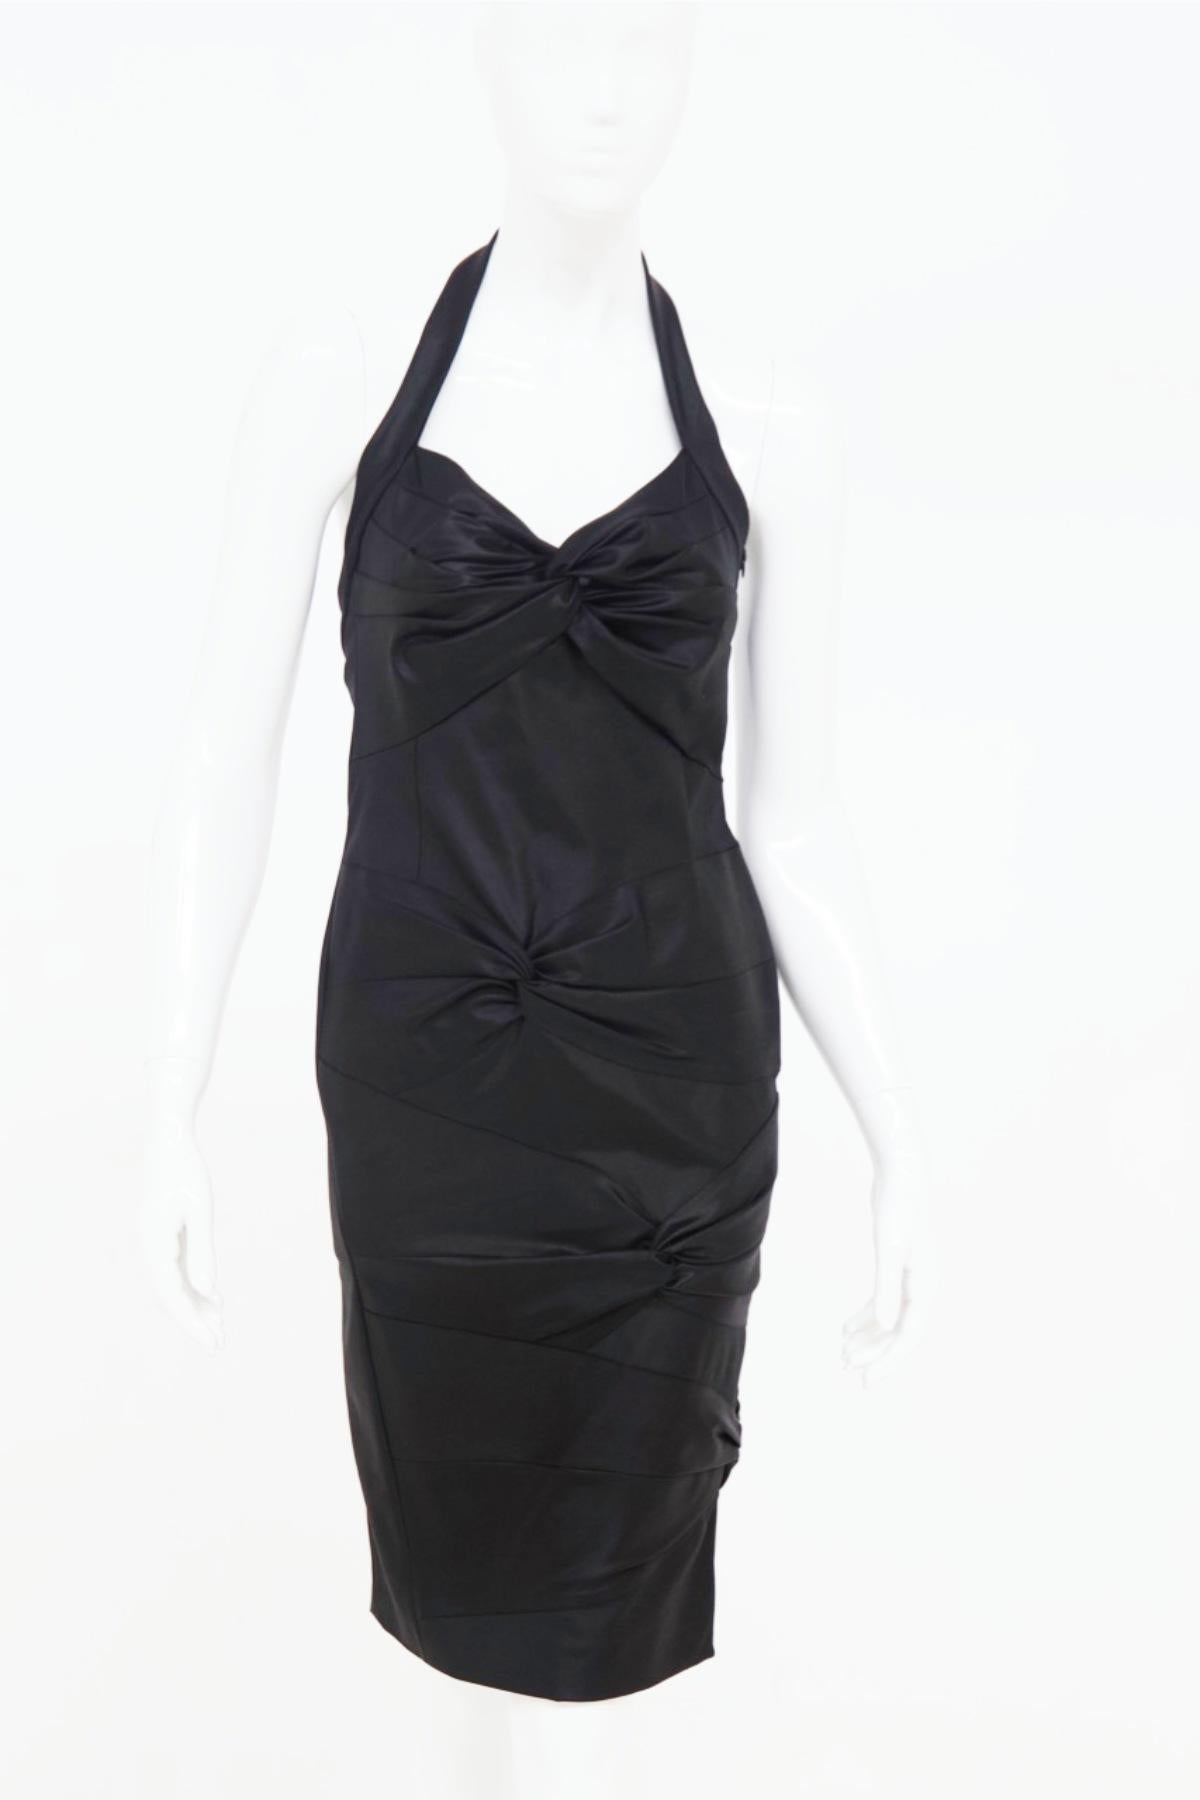 Christian Dior by John Galliano Black Satin Silk Lined Knot Dress For Sale 8